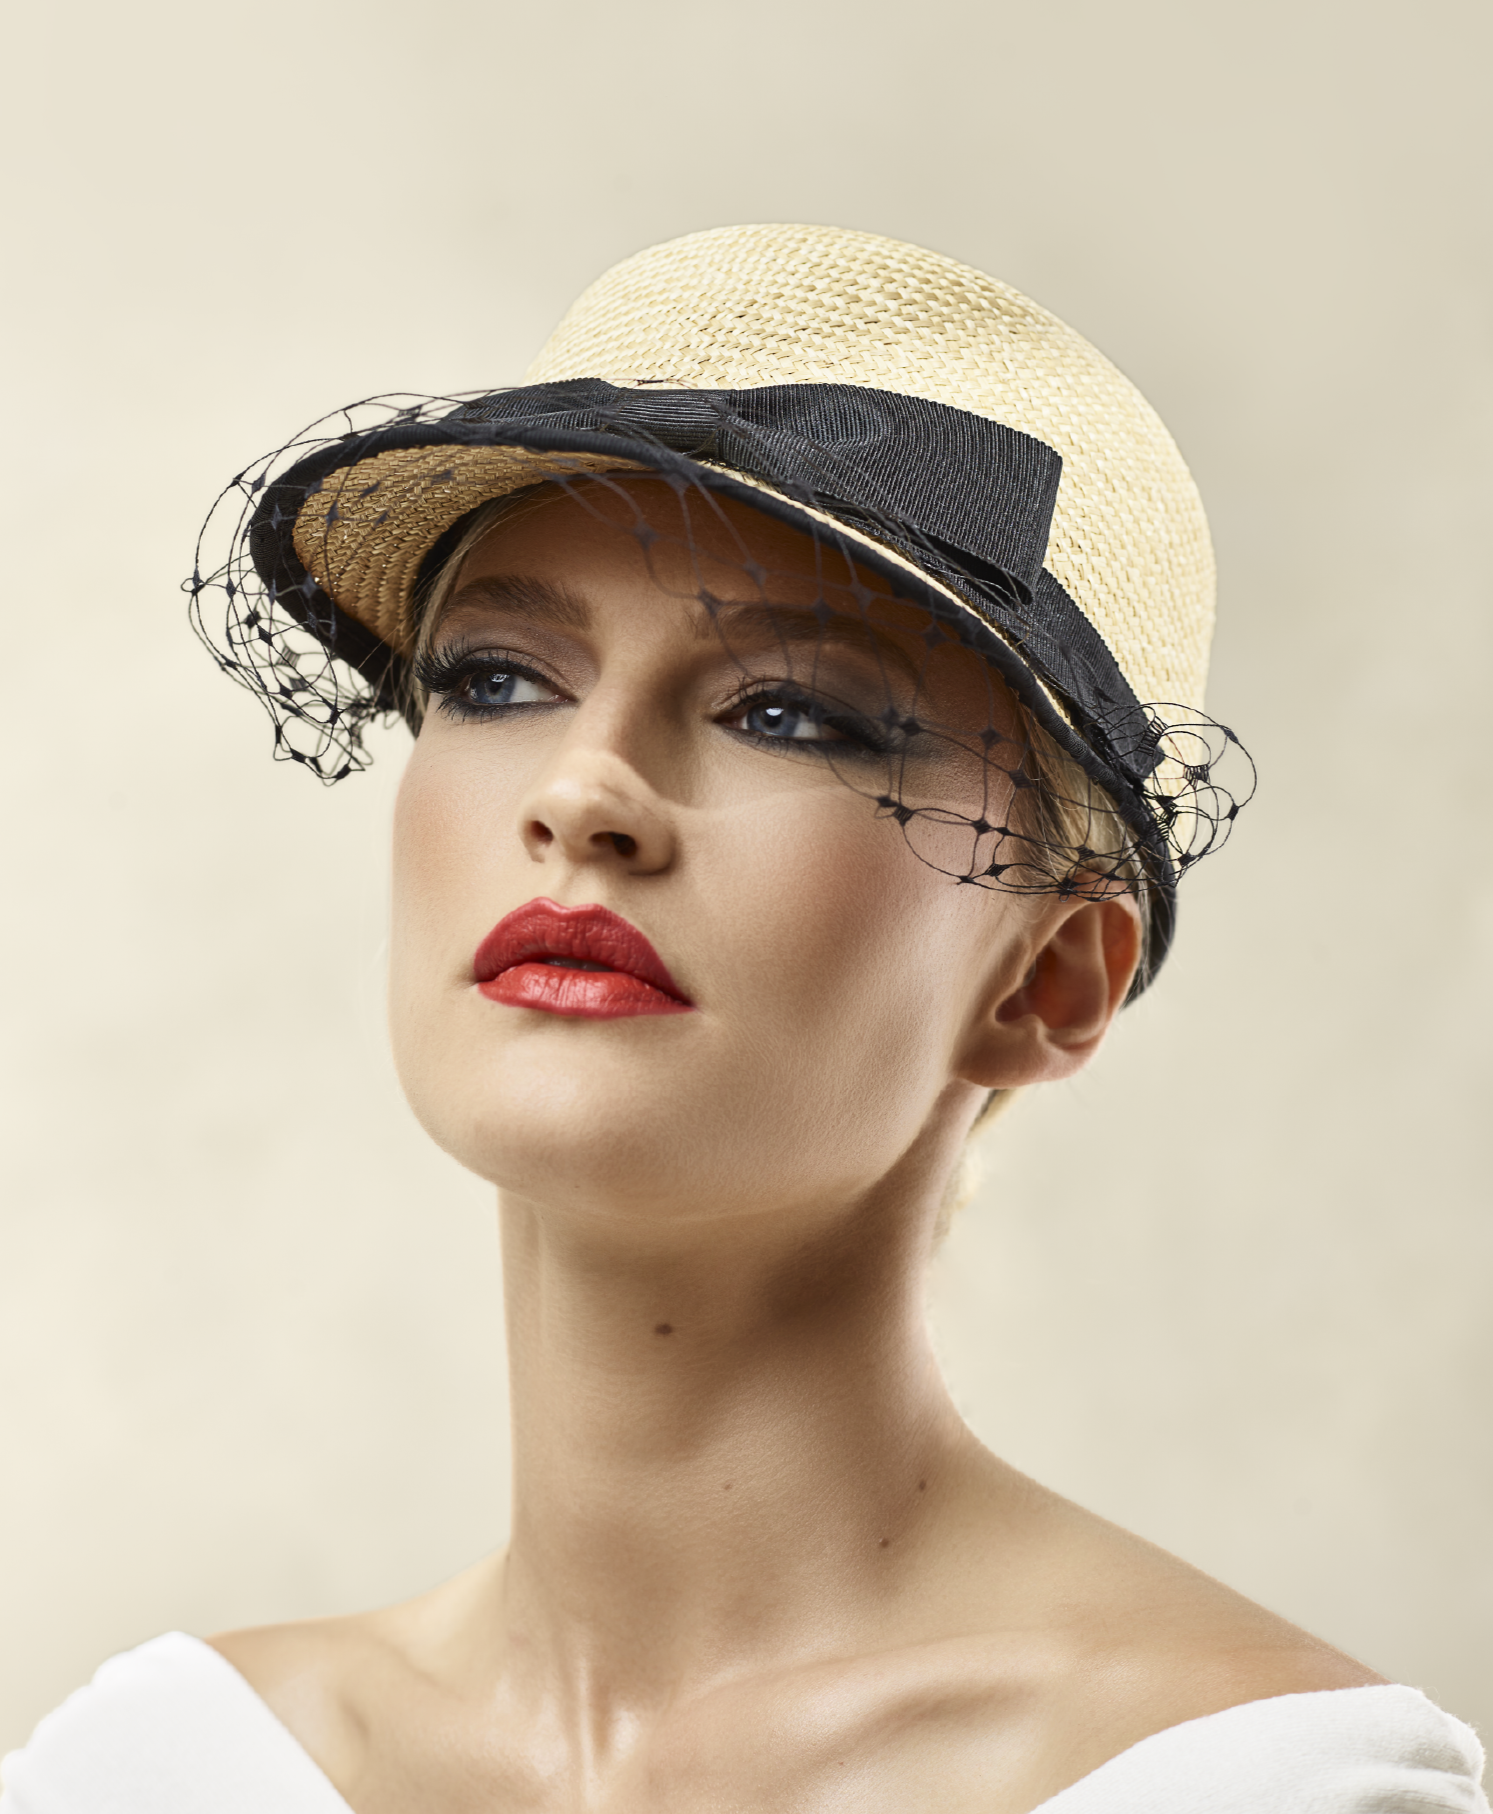 Misa Harada Hats| ALPHA | Porter’s cap in Nante straw, with black veiled peak and grosgrain bow